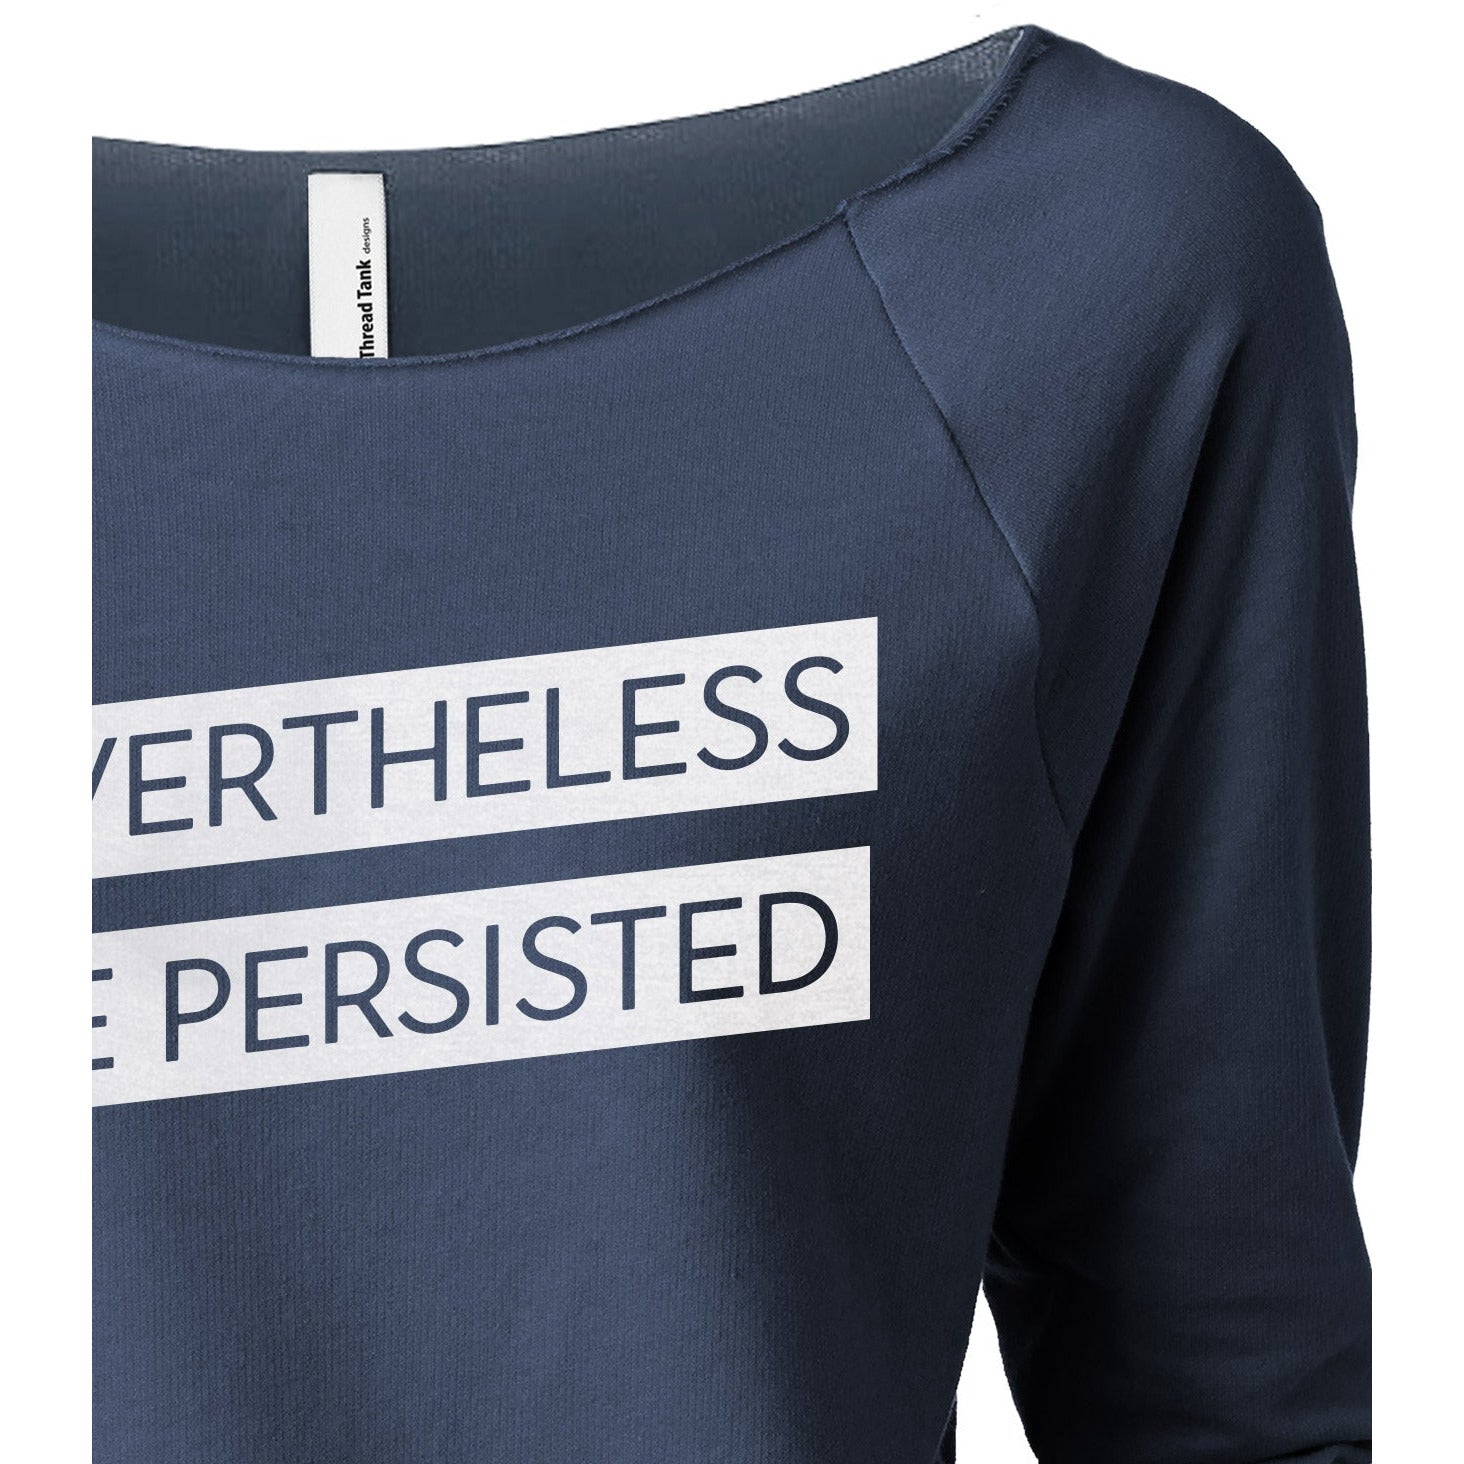 Nevertheless She Persisted Women's Graphic Printed Lightweight Slouchy 3/4 Sleeves Sweatshirt Navy Closeup